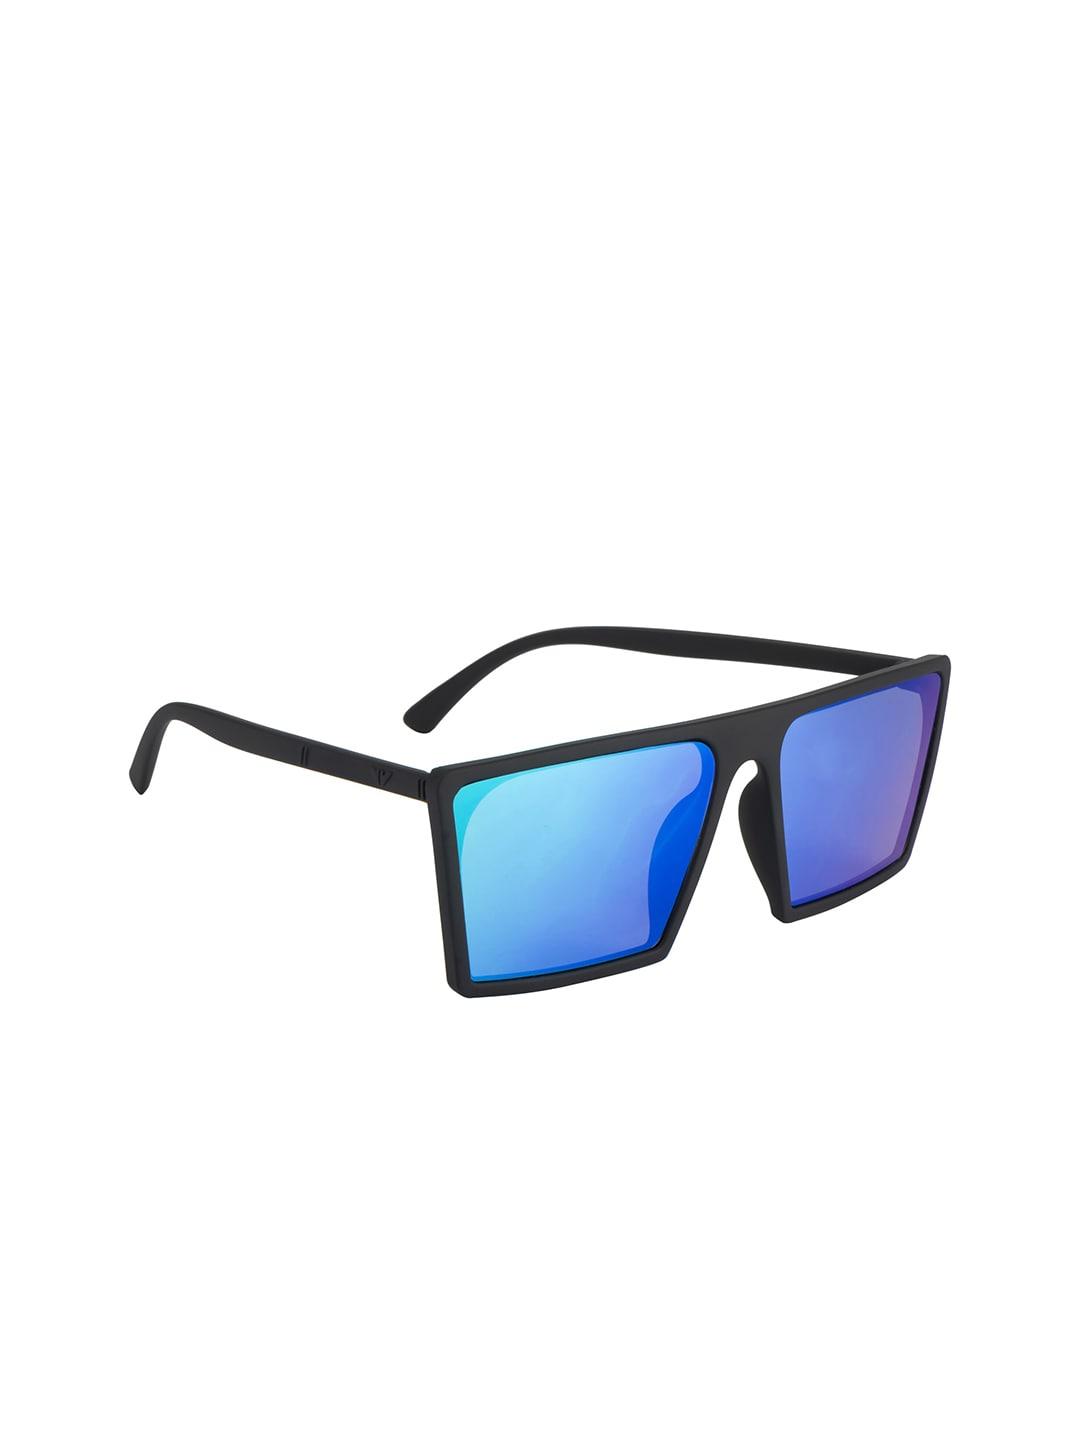 mast & harbour unisex green & blue lens & black square sunglasses with uv protected lens